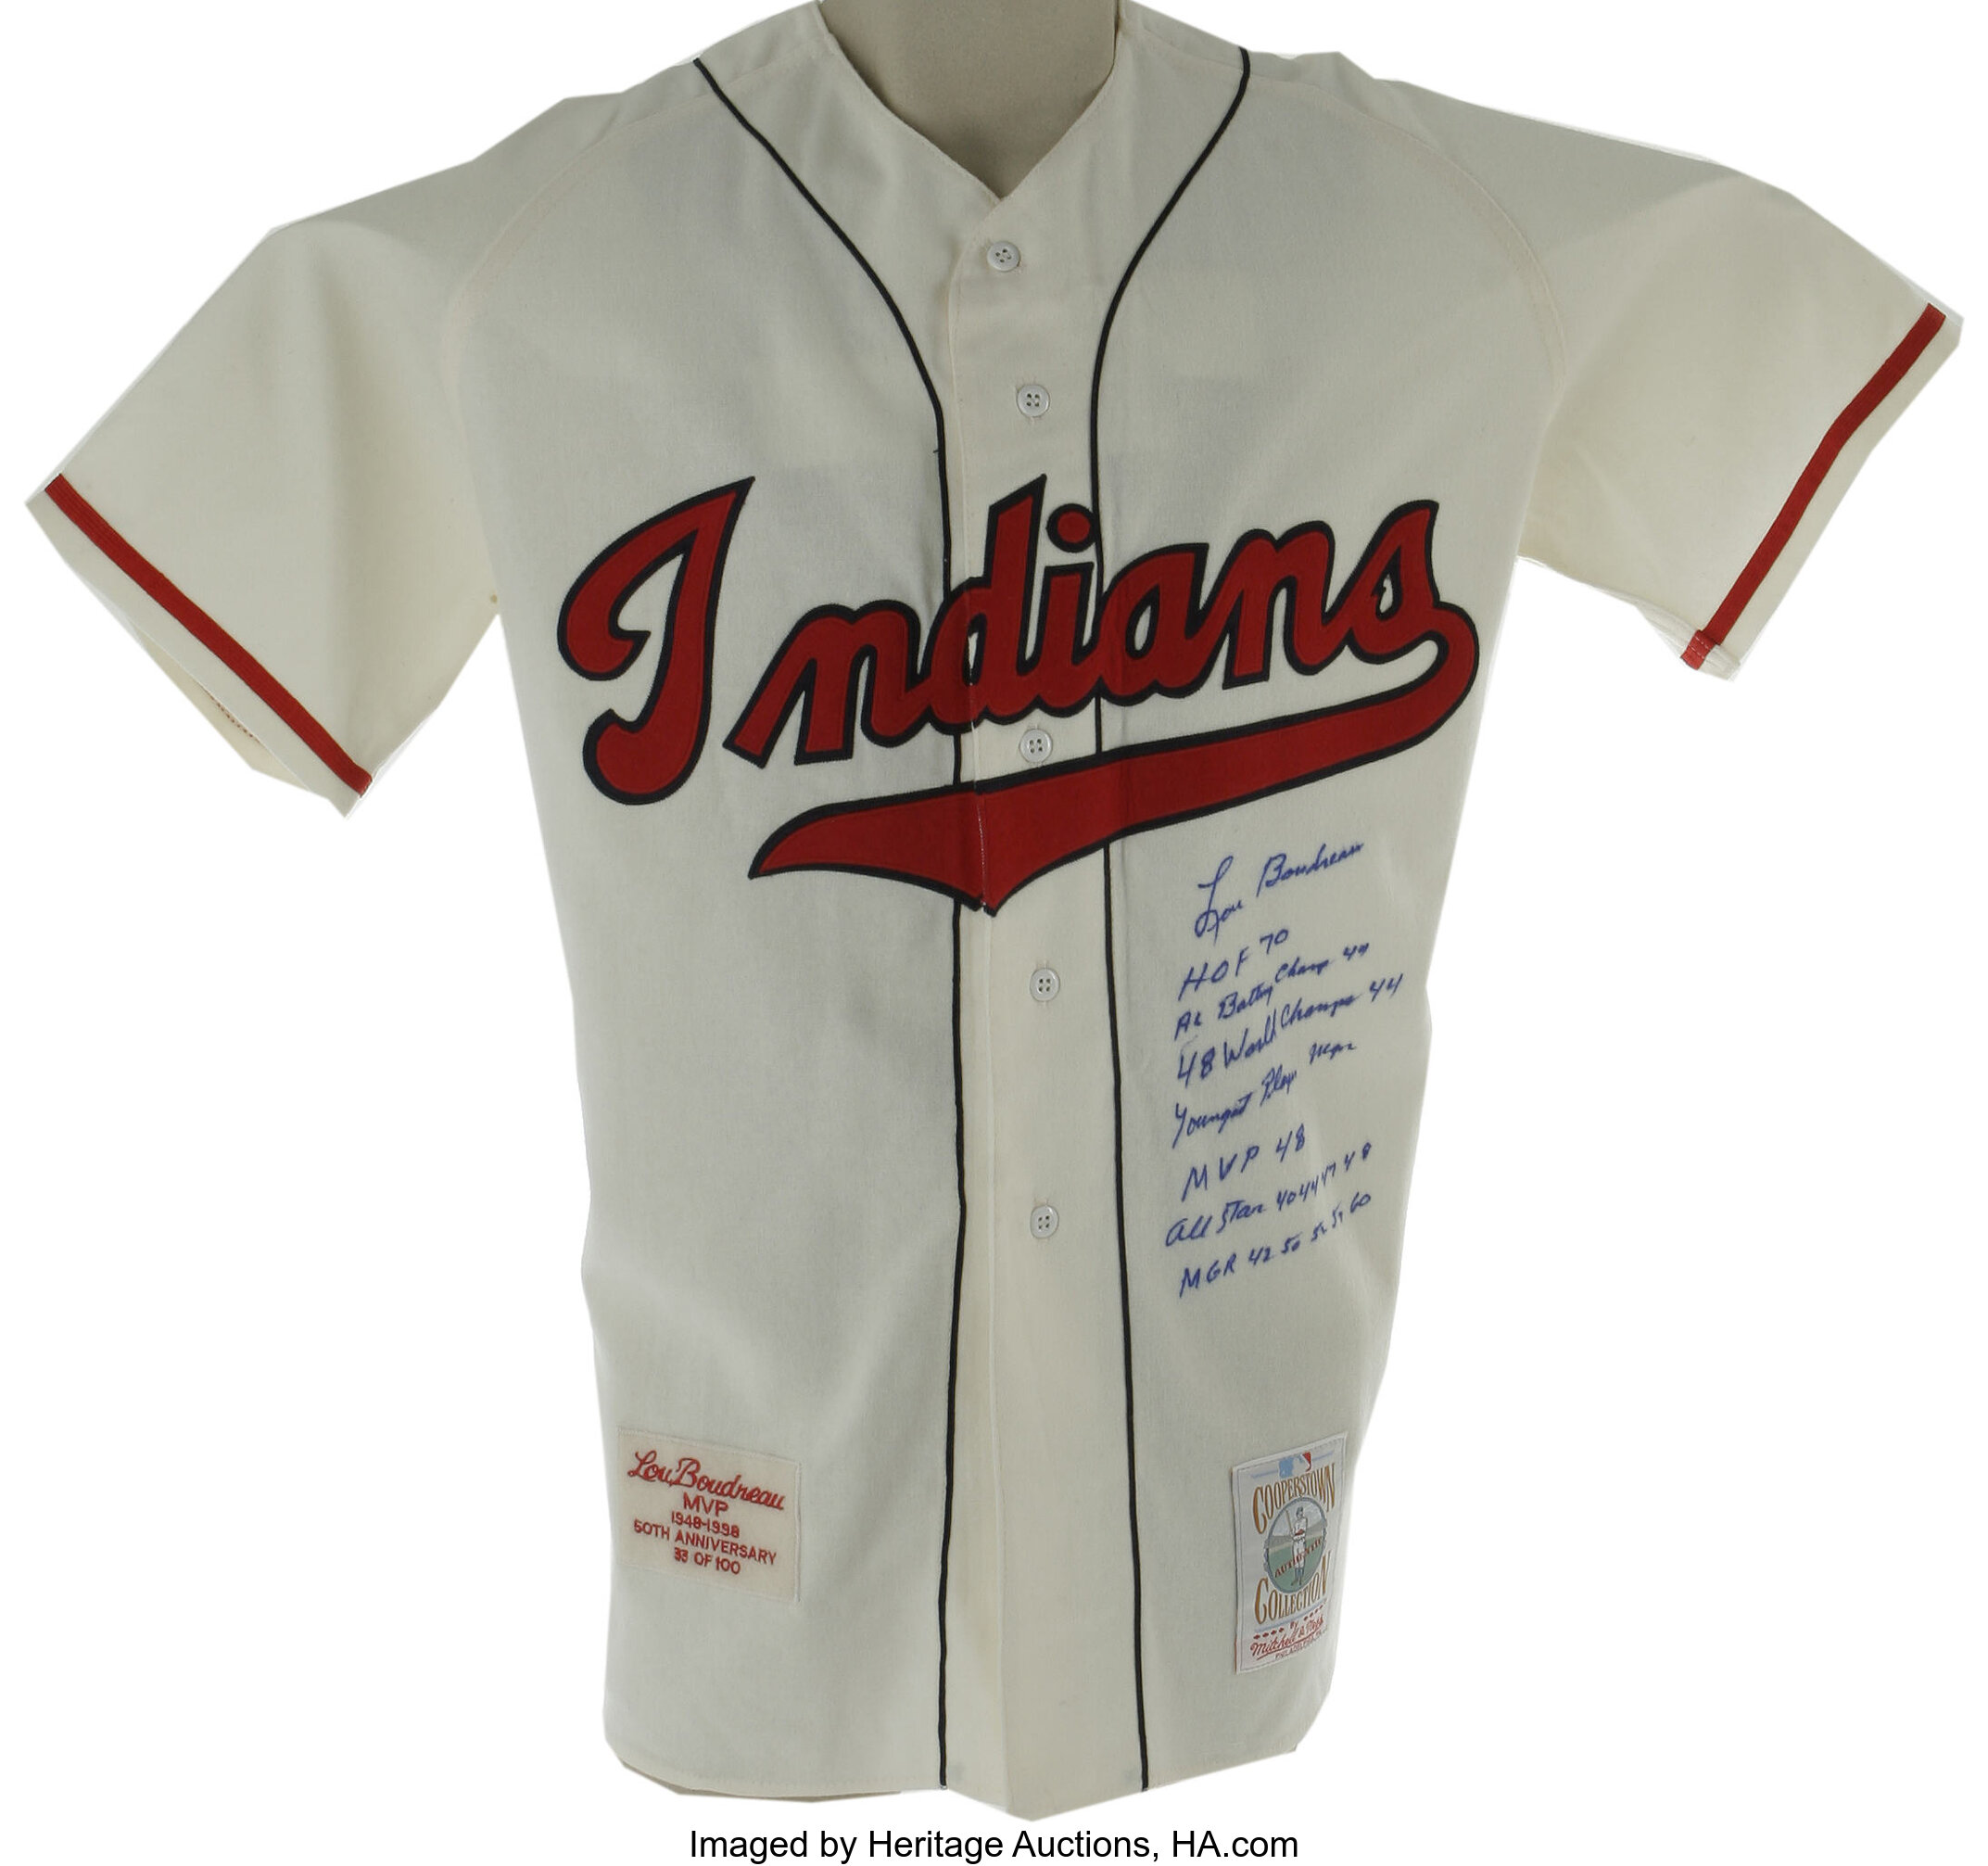 Lou Boudreau Signed Throwback Stat Jersey. One of the finest, Lot #10324